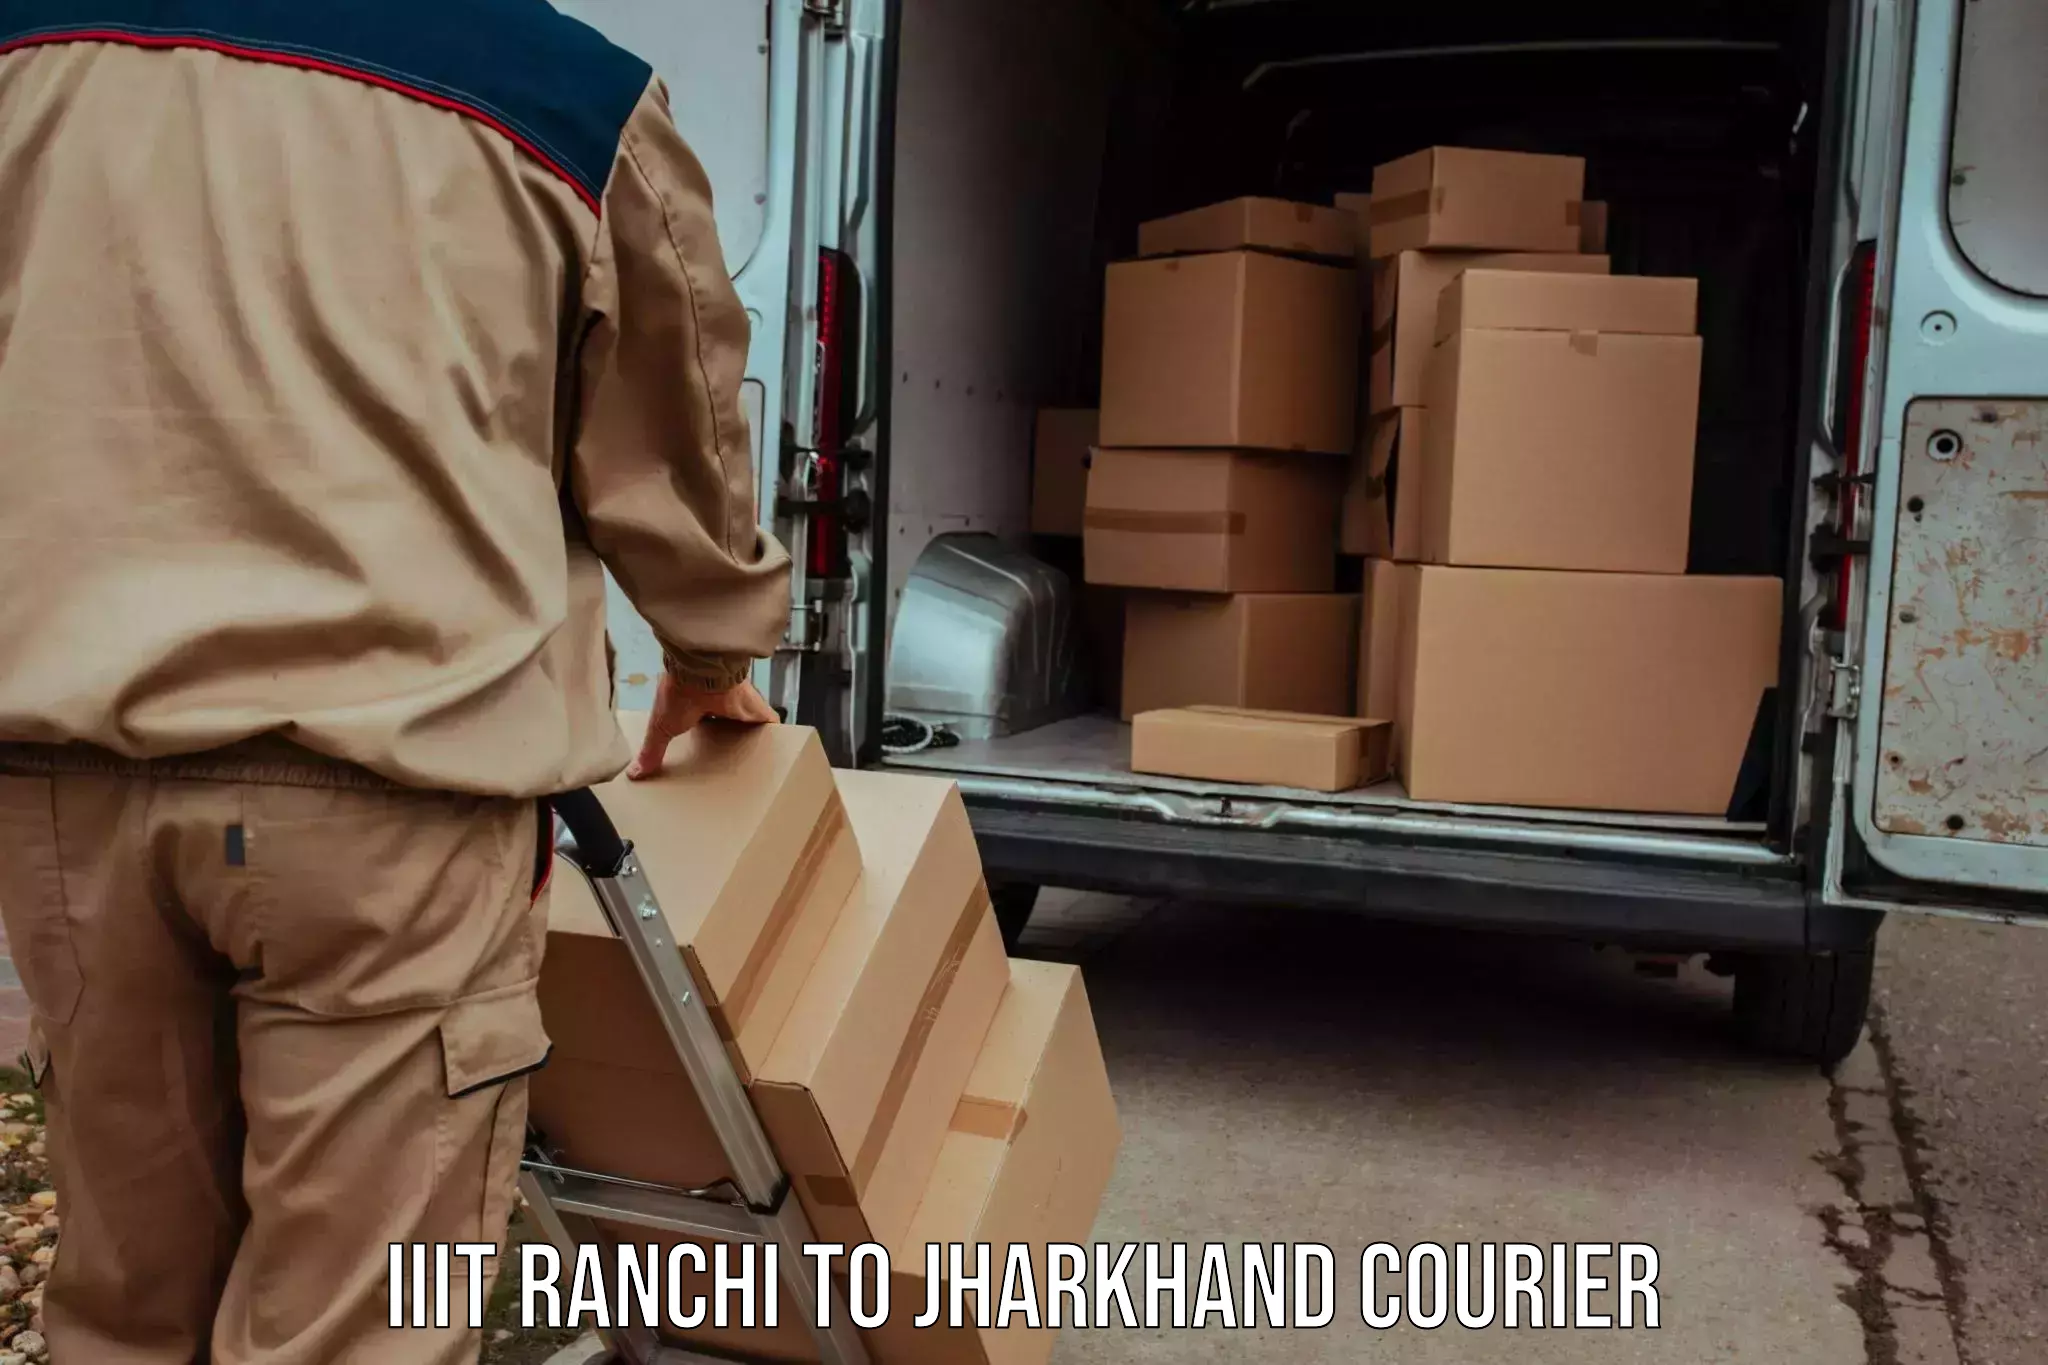 Efficient freight transportation IIIT Ranchi to Jharkhand